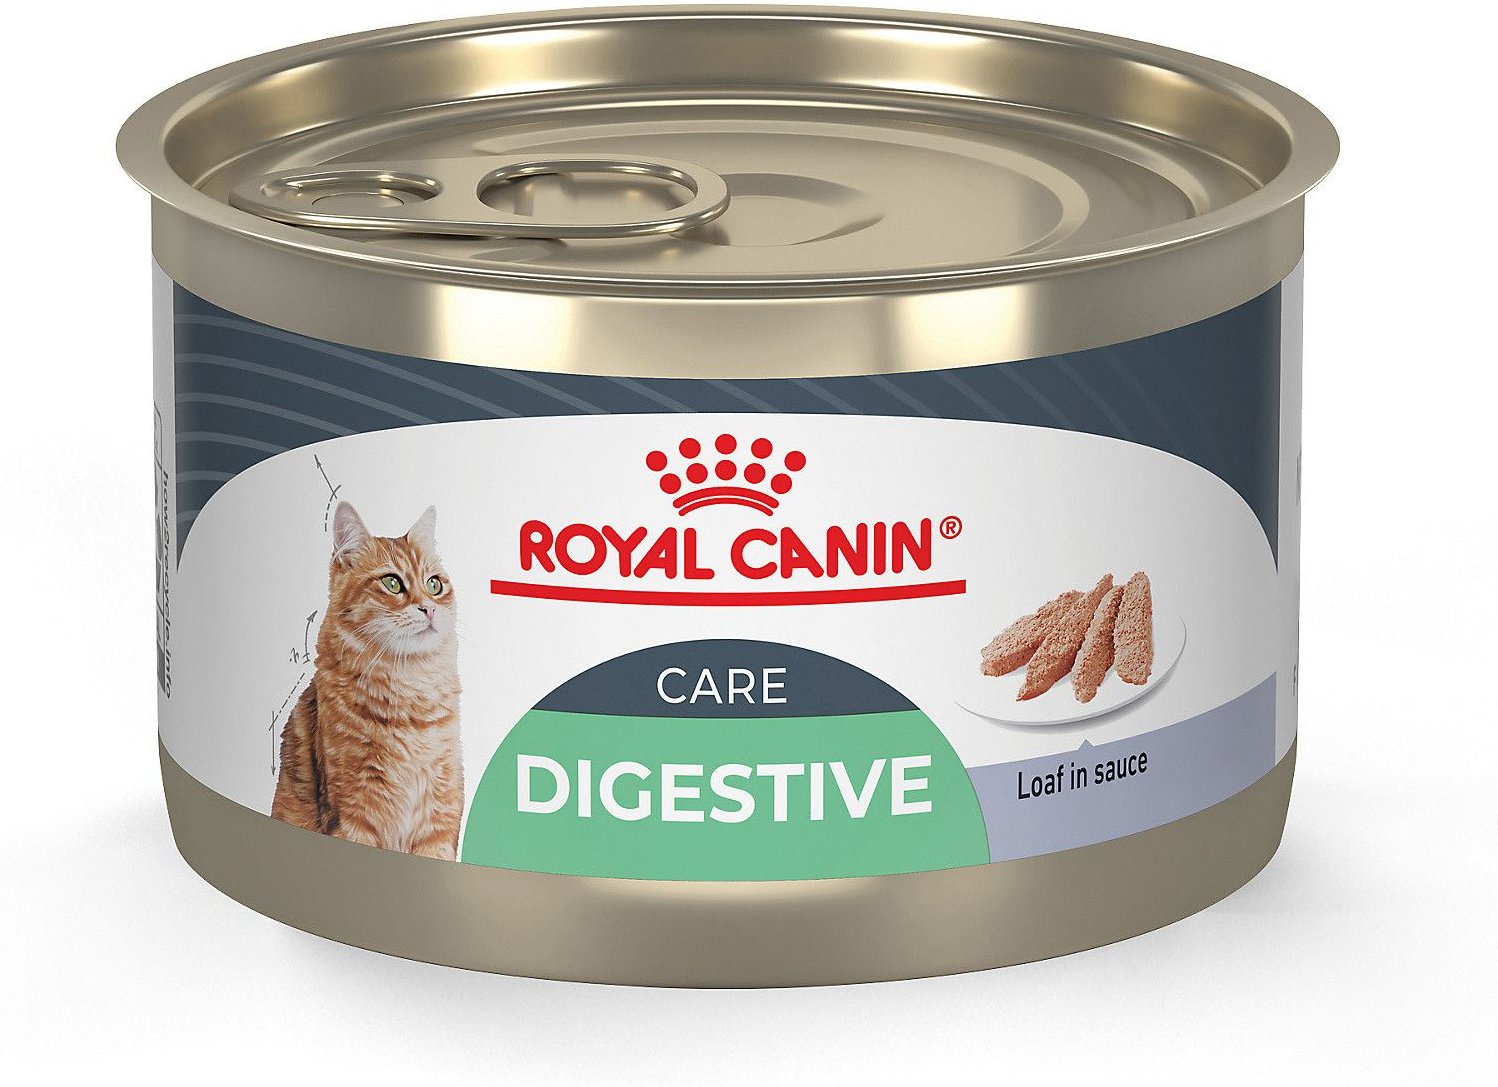 ROYAL CANIN Digest Sensitive Loaf in Sauce Canned Cat Food, 5.1oz